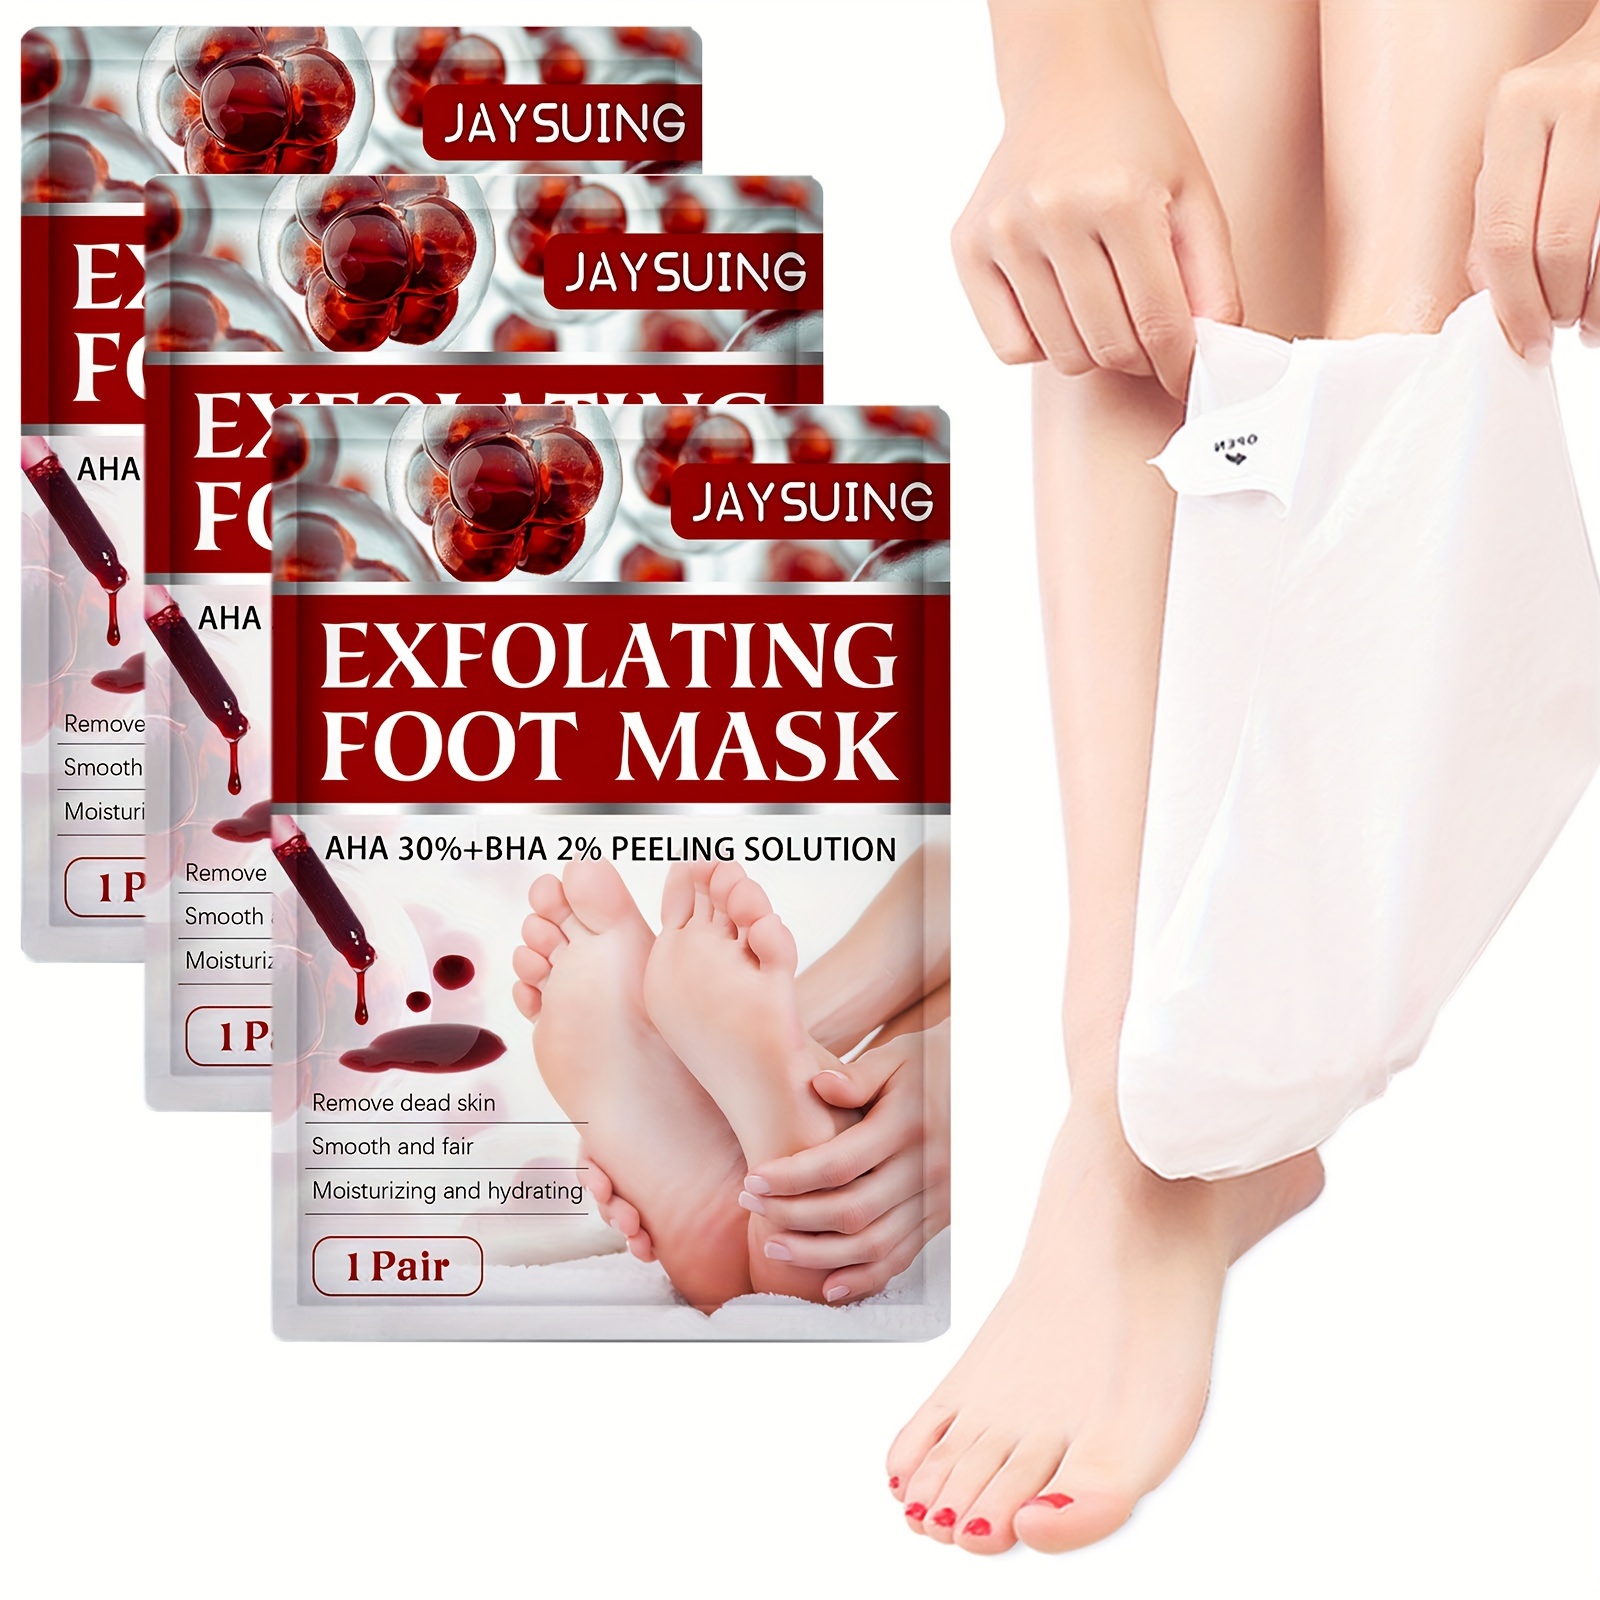 

3 Pairs Fruit Acid Exfoliating Foot Mask, Moisturizes And Nourishes, For Dead Skin, Hydrates And Softens Skin, Soften Calluses And Exfoliates